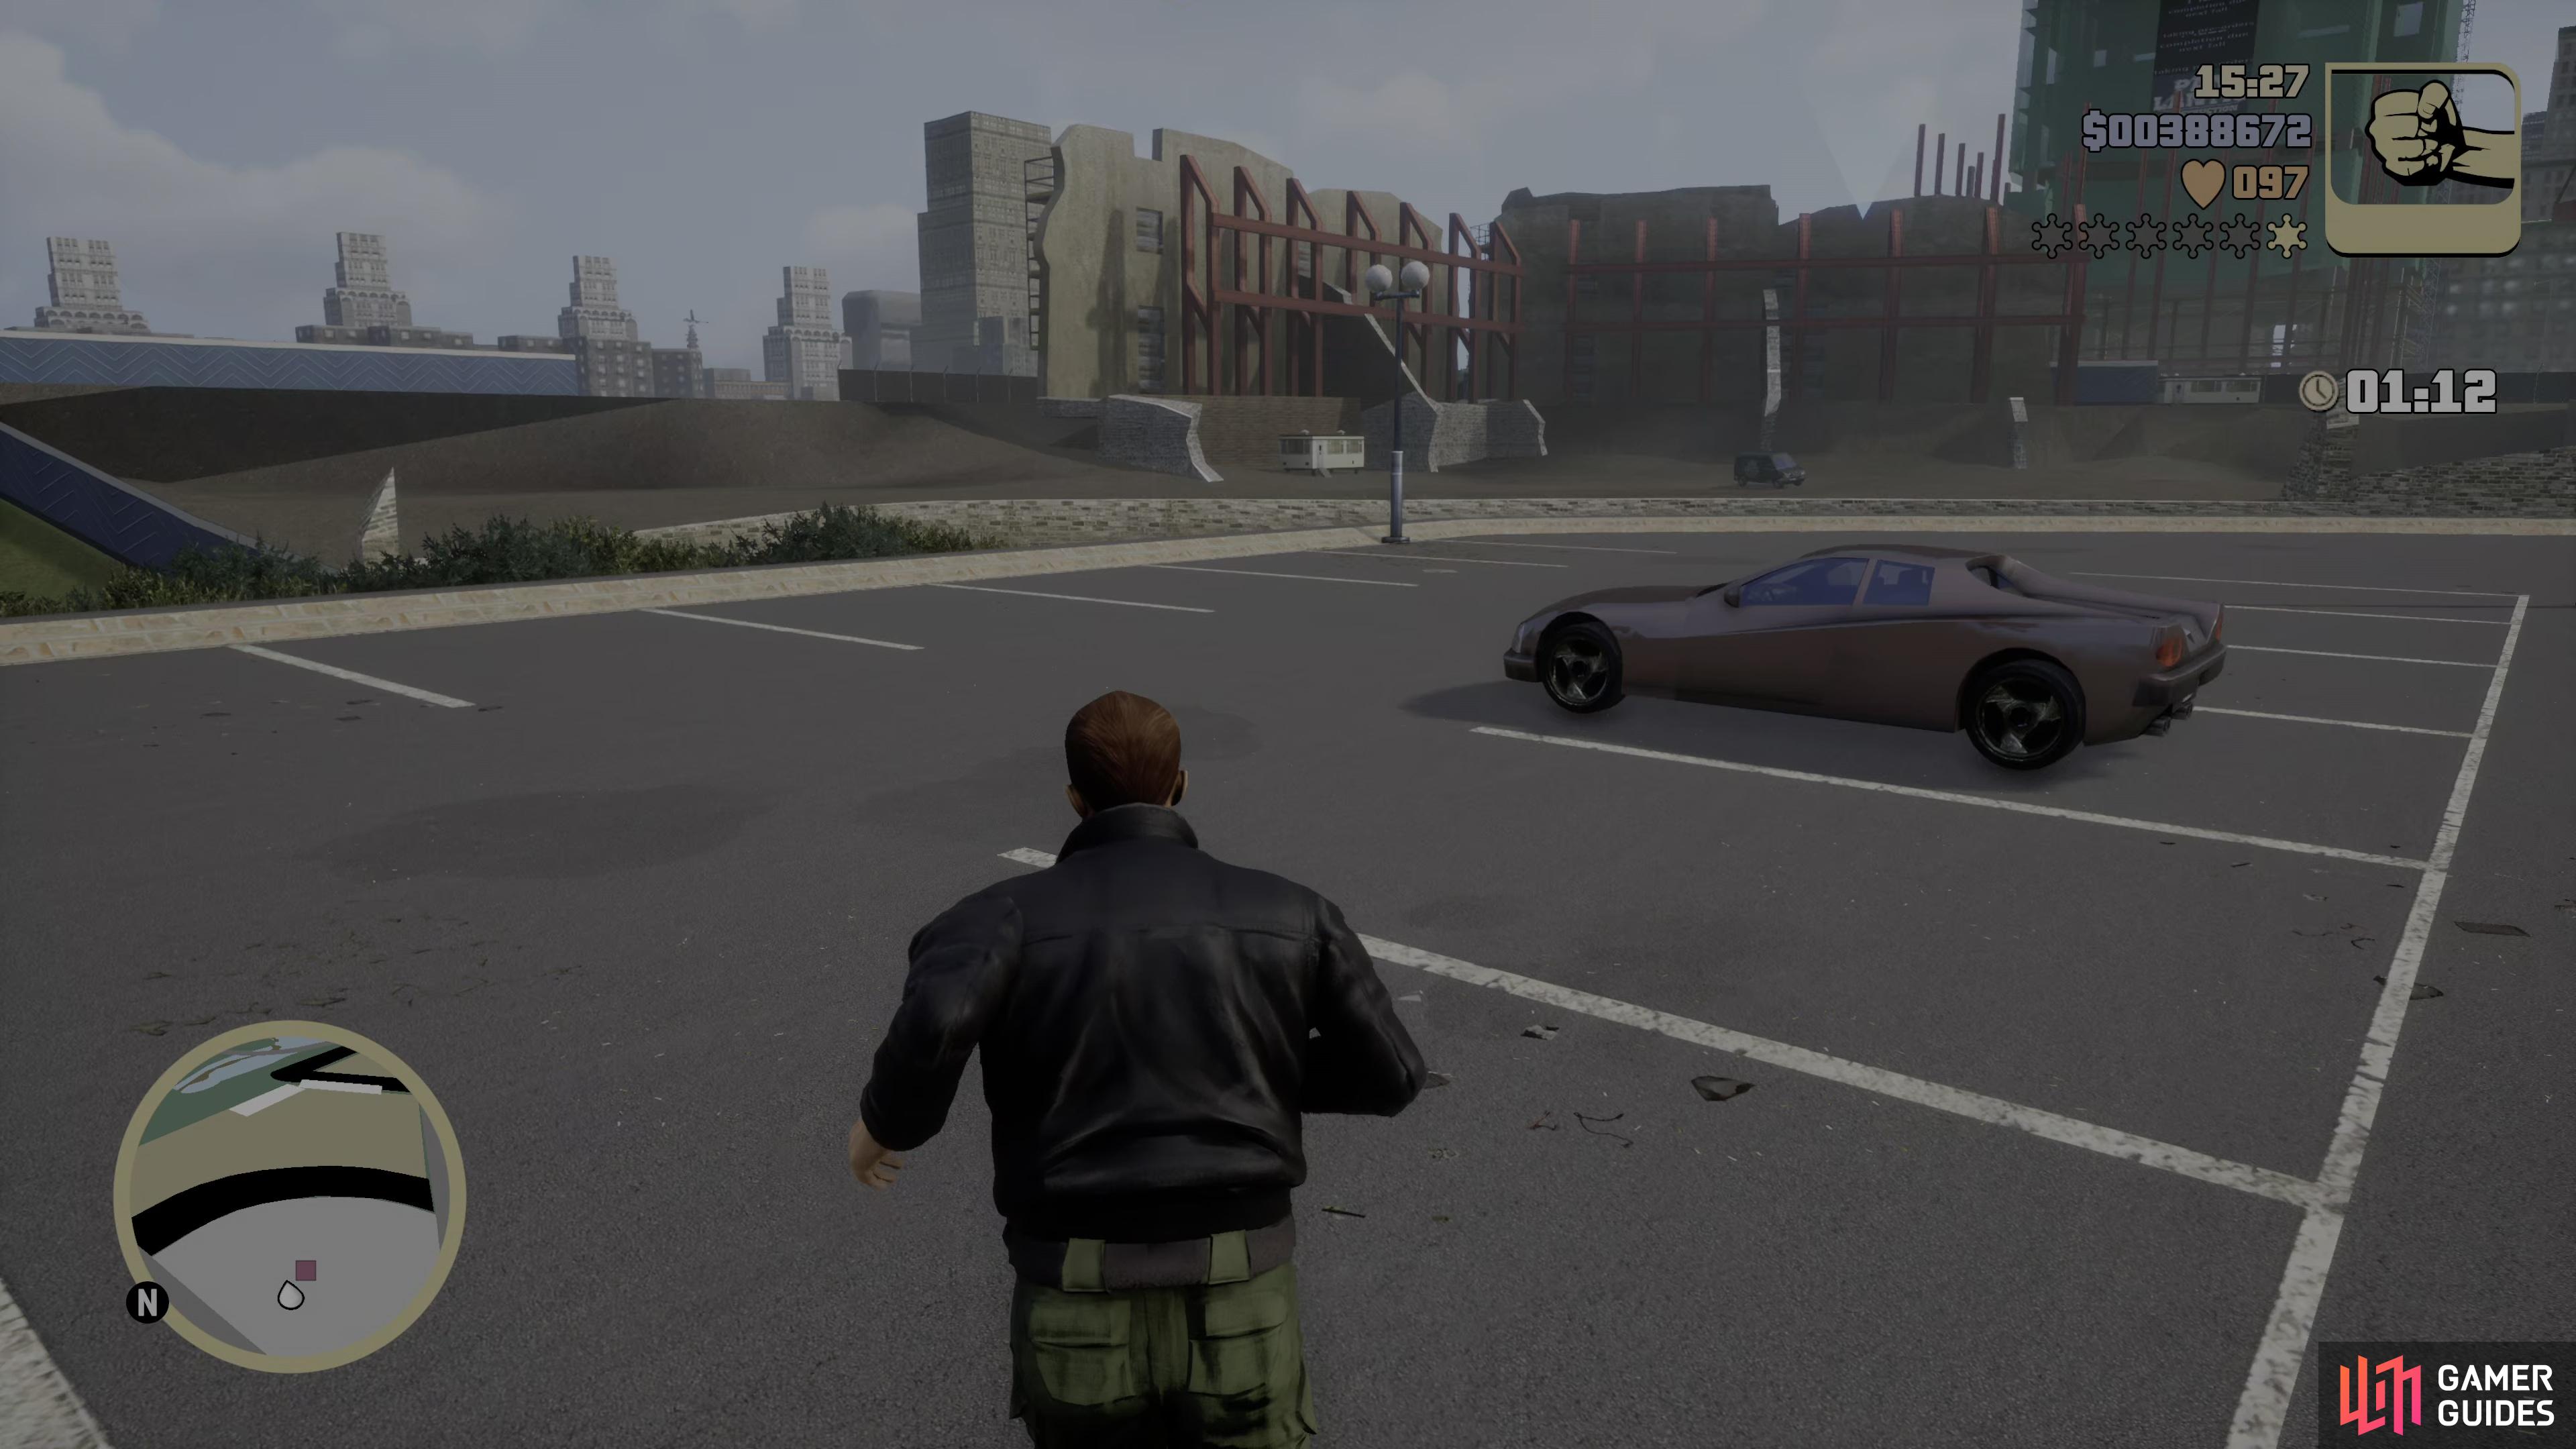 to find the Infernus parked near the hospital